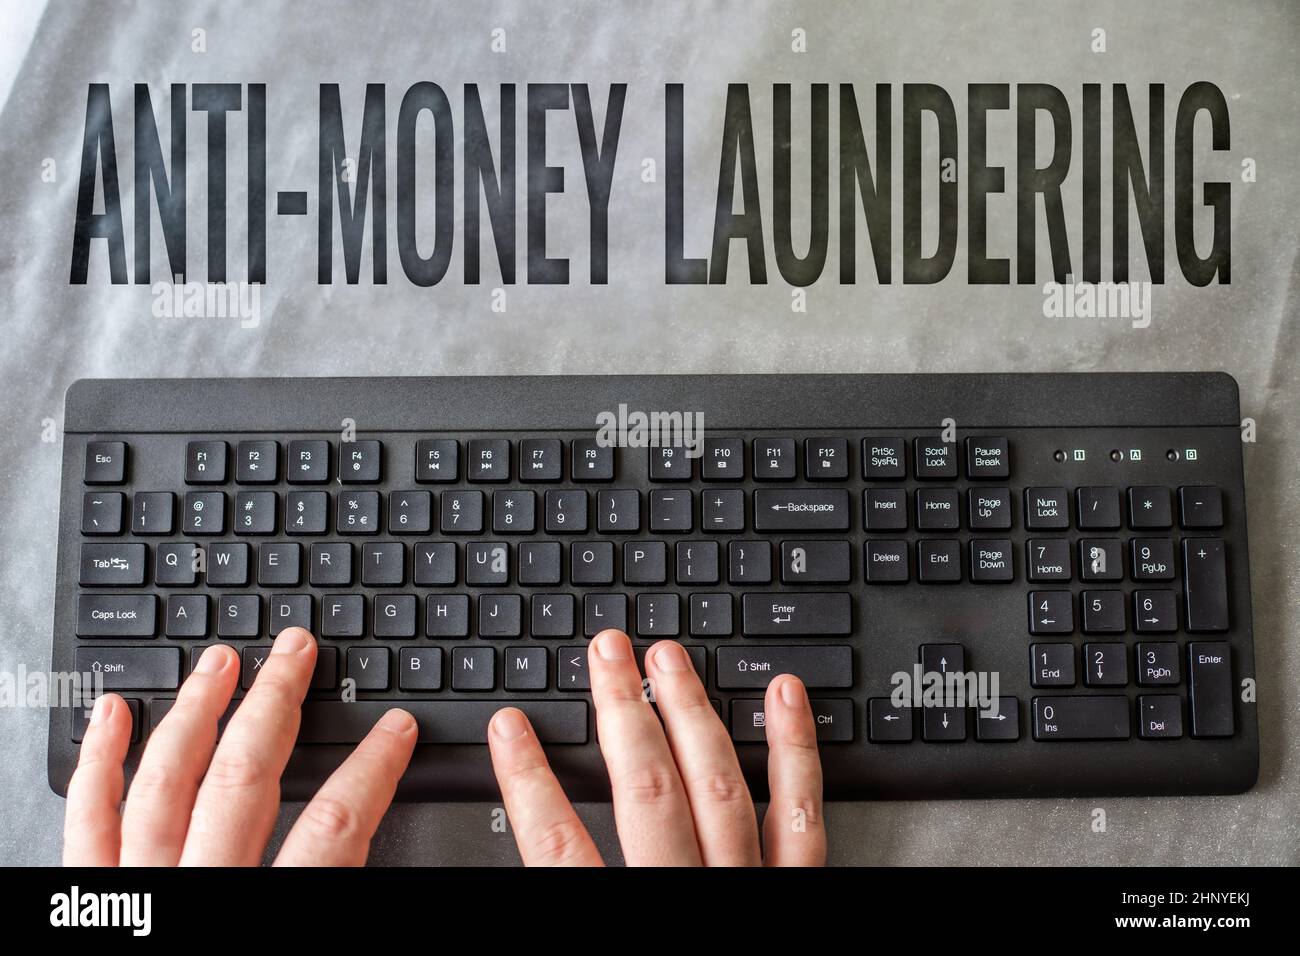 Writing displaying text Anti Money Laundering, Business idea regulations stop generating income through illegal actions Hands Pointing Pressing Comput Stock Photo